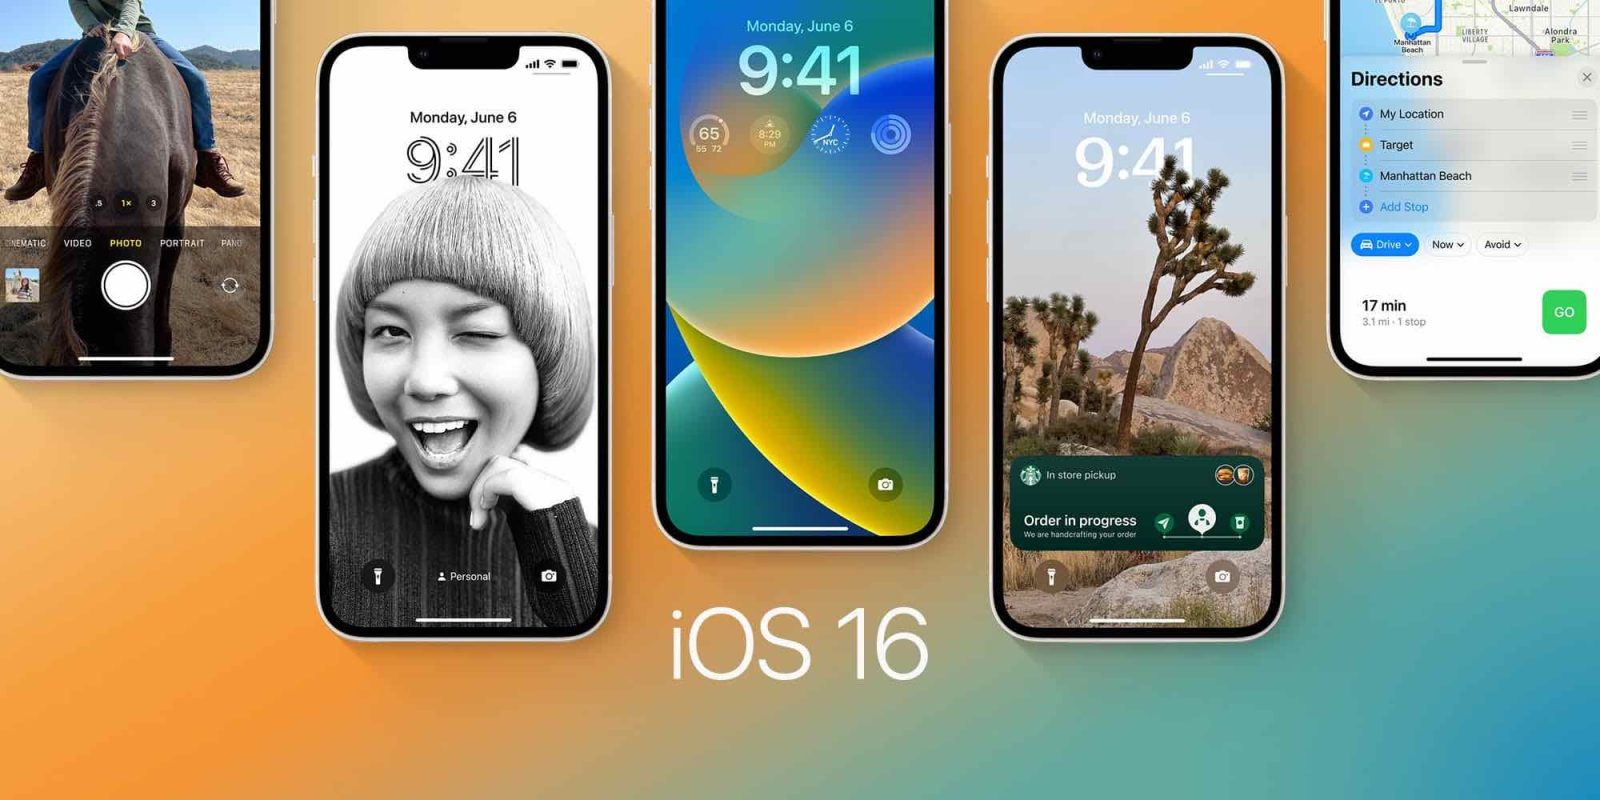 Apple releasing iOS 16 to iPhone users on September 12